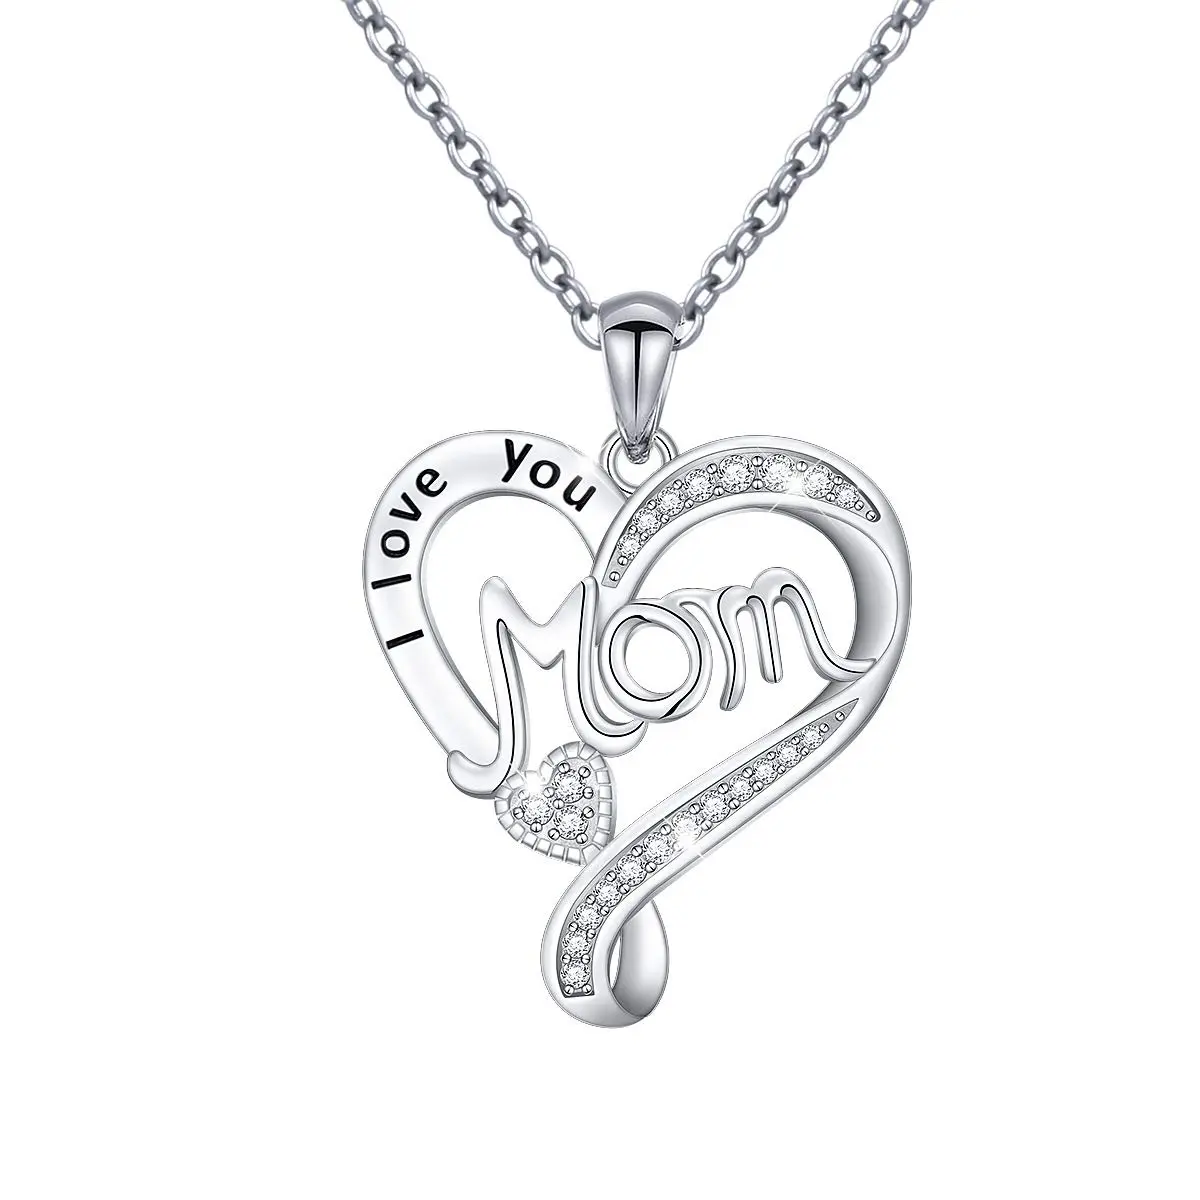 I LOVE YOU MOM Mother Day Jewelry Customize 925 Sterling Silver Heart Mom Pendant Mother Day Gifts 2021